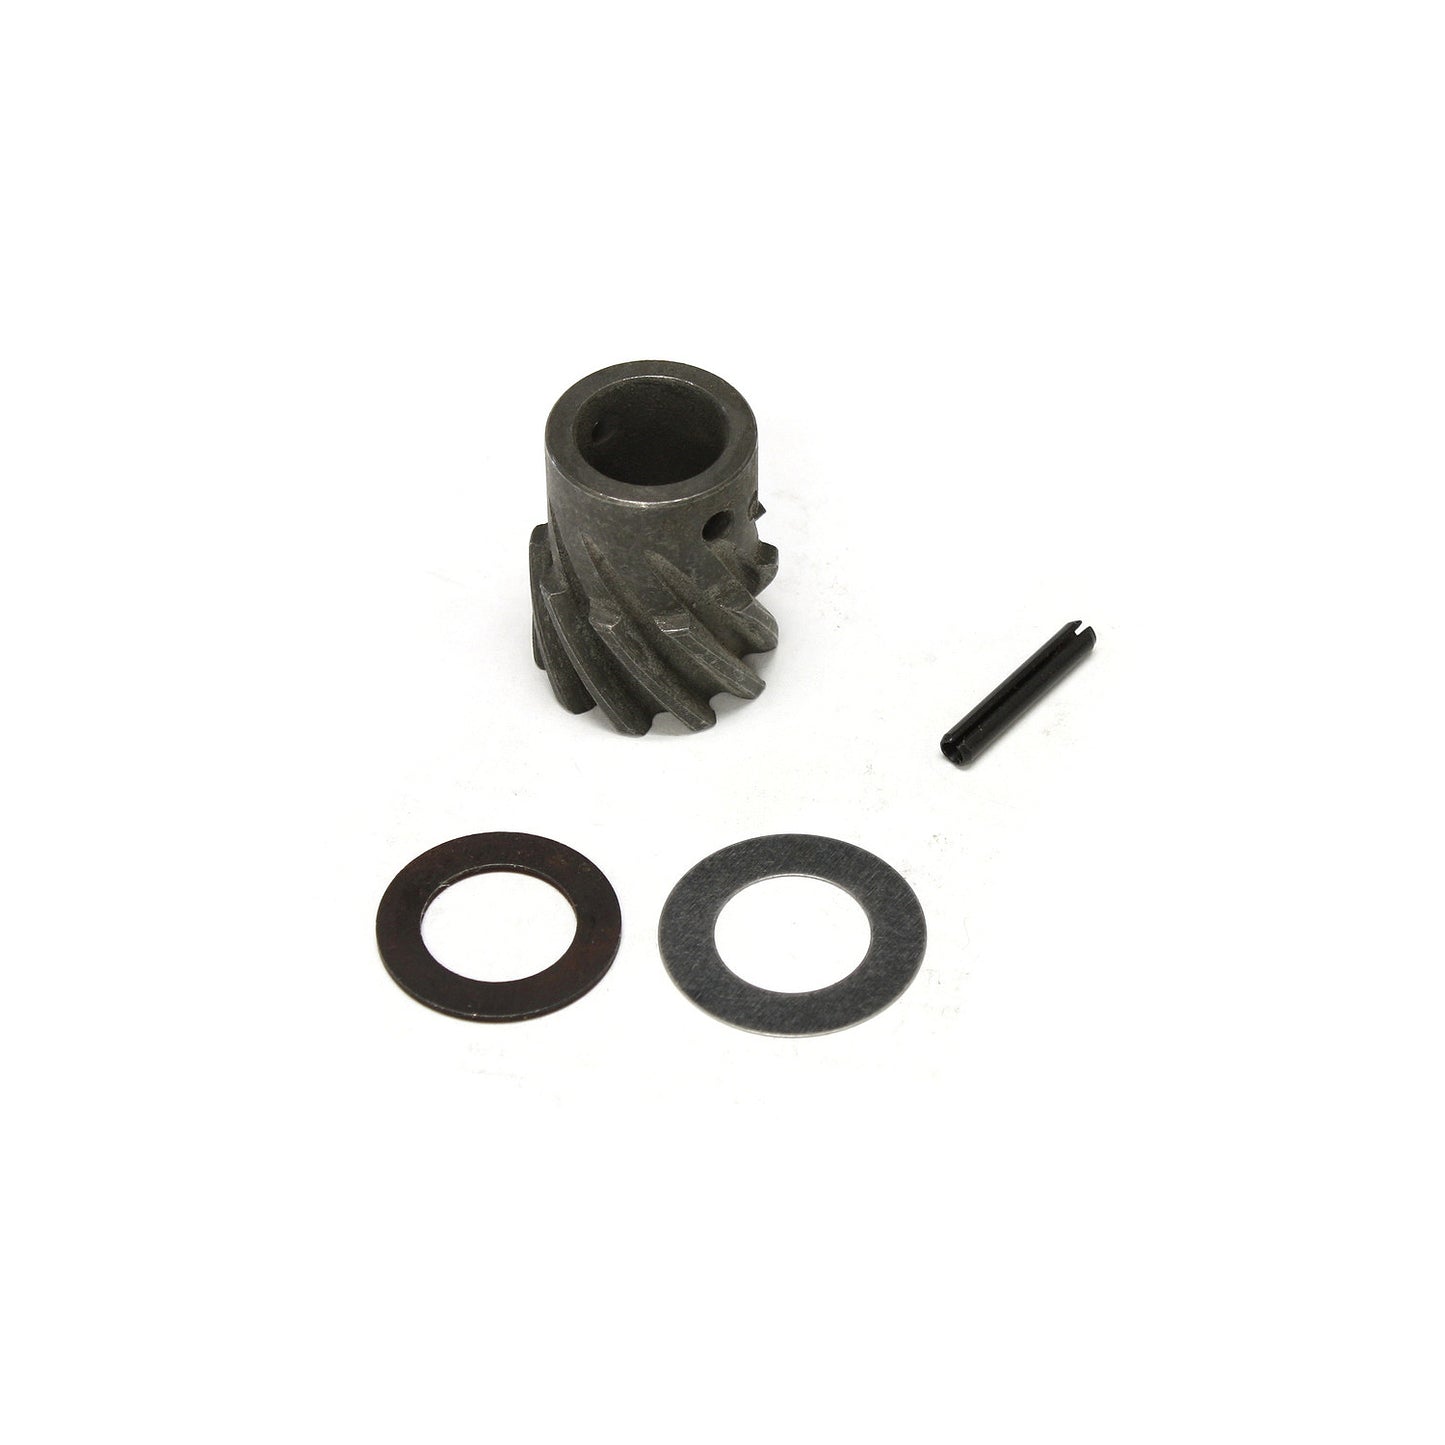 PerTronix 023-1001 Gear Kit for PerTronix Industrial Electronic Distributor